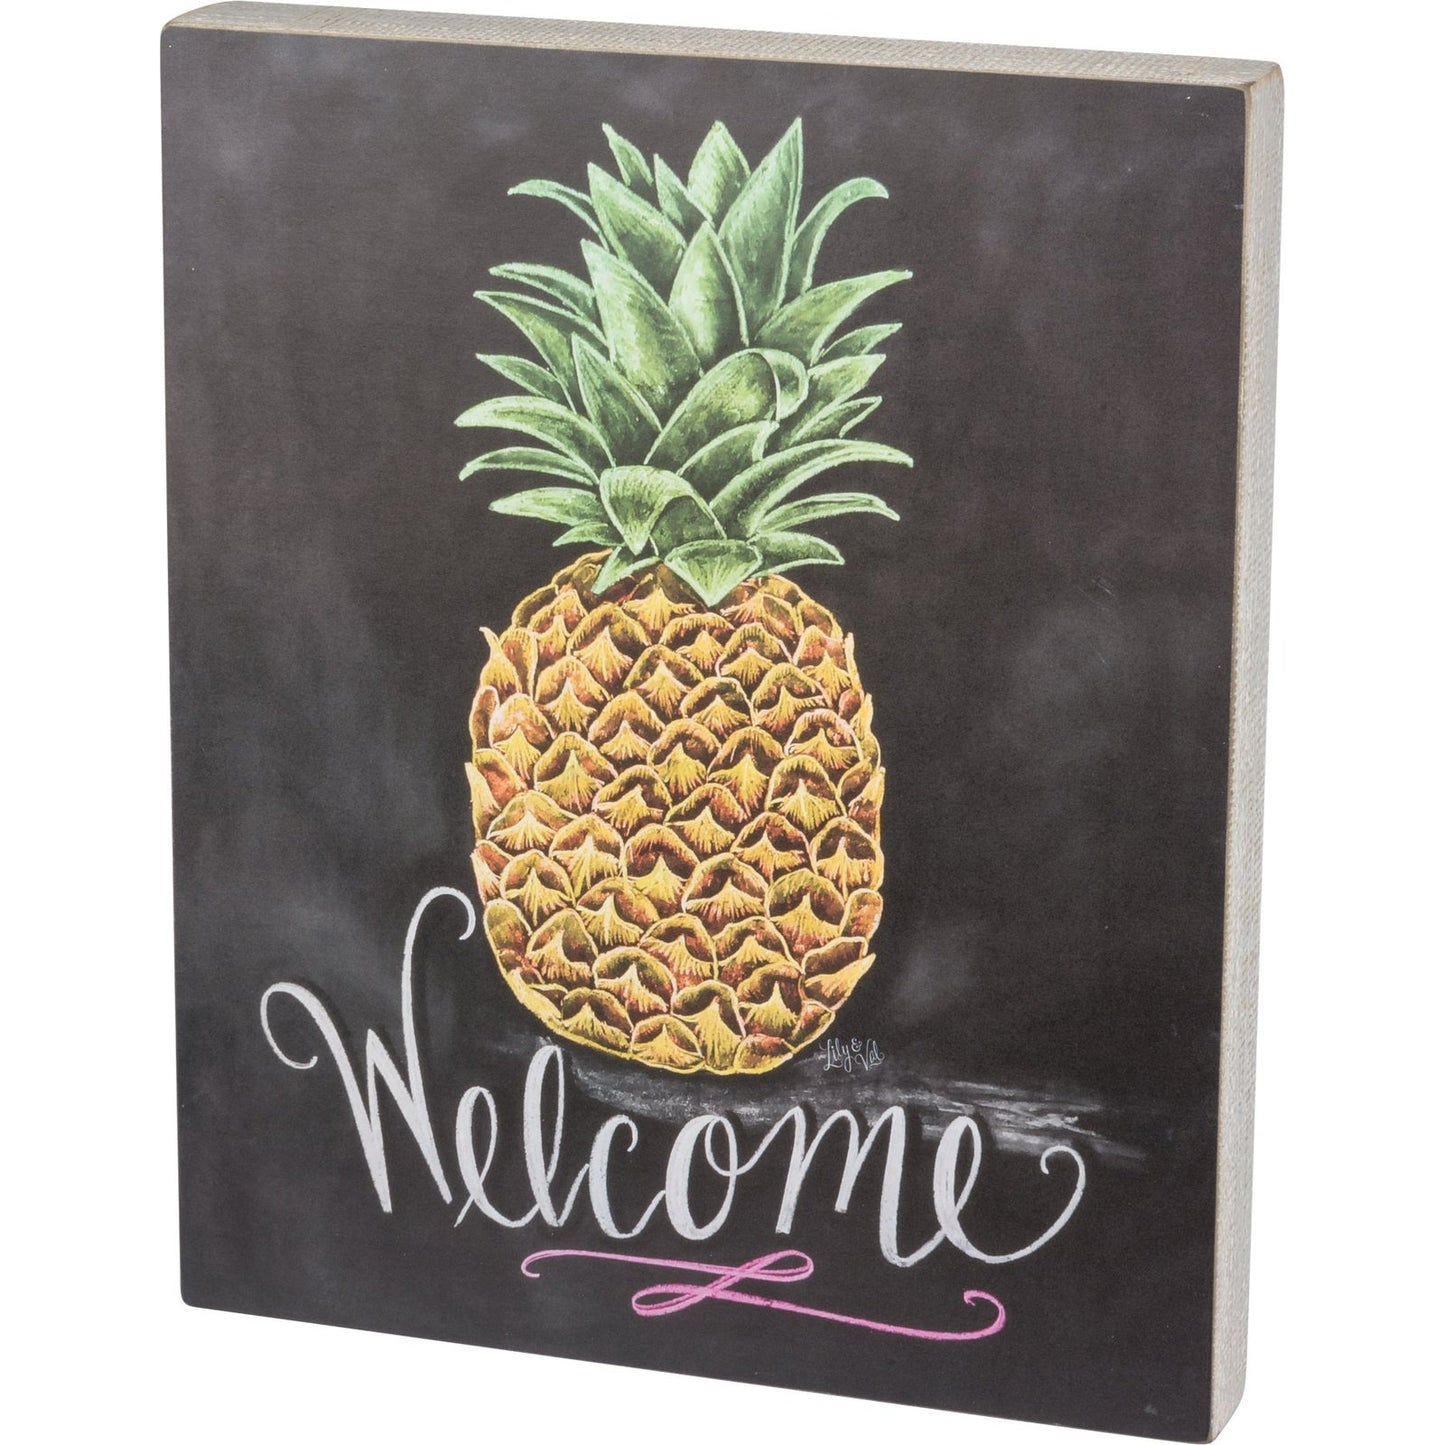 Pineapple Welcome Wall Sign SolagoHome